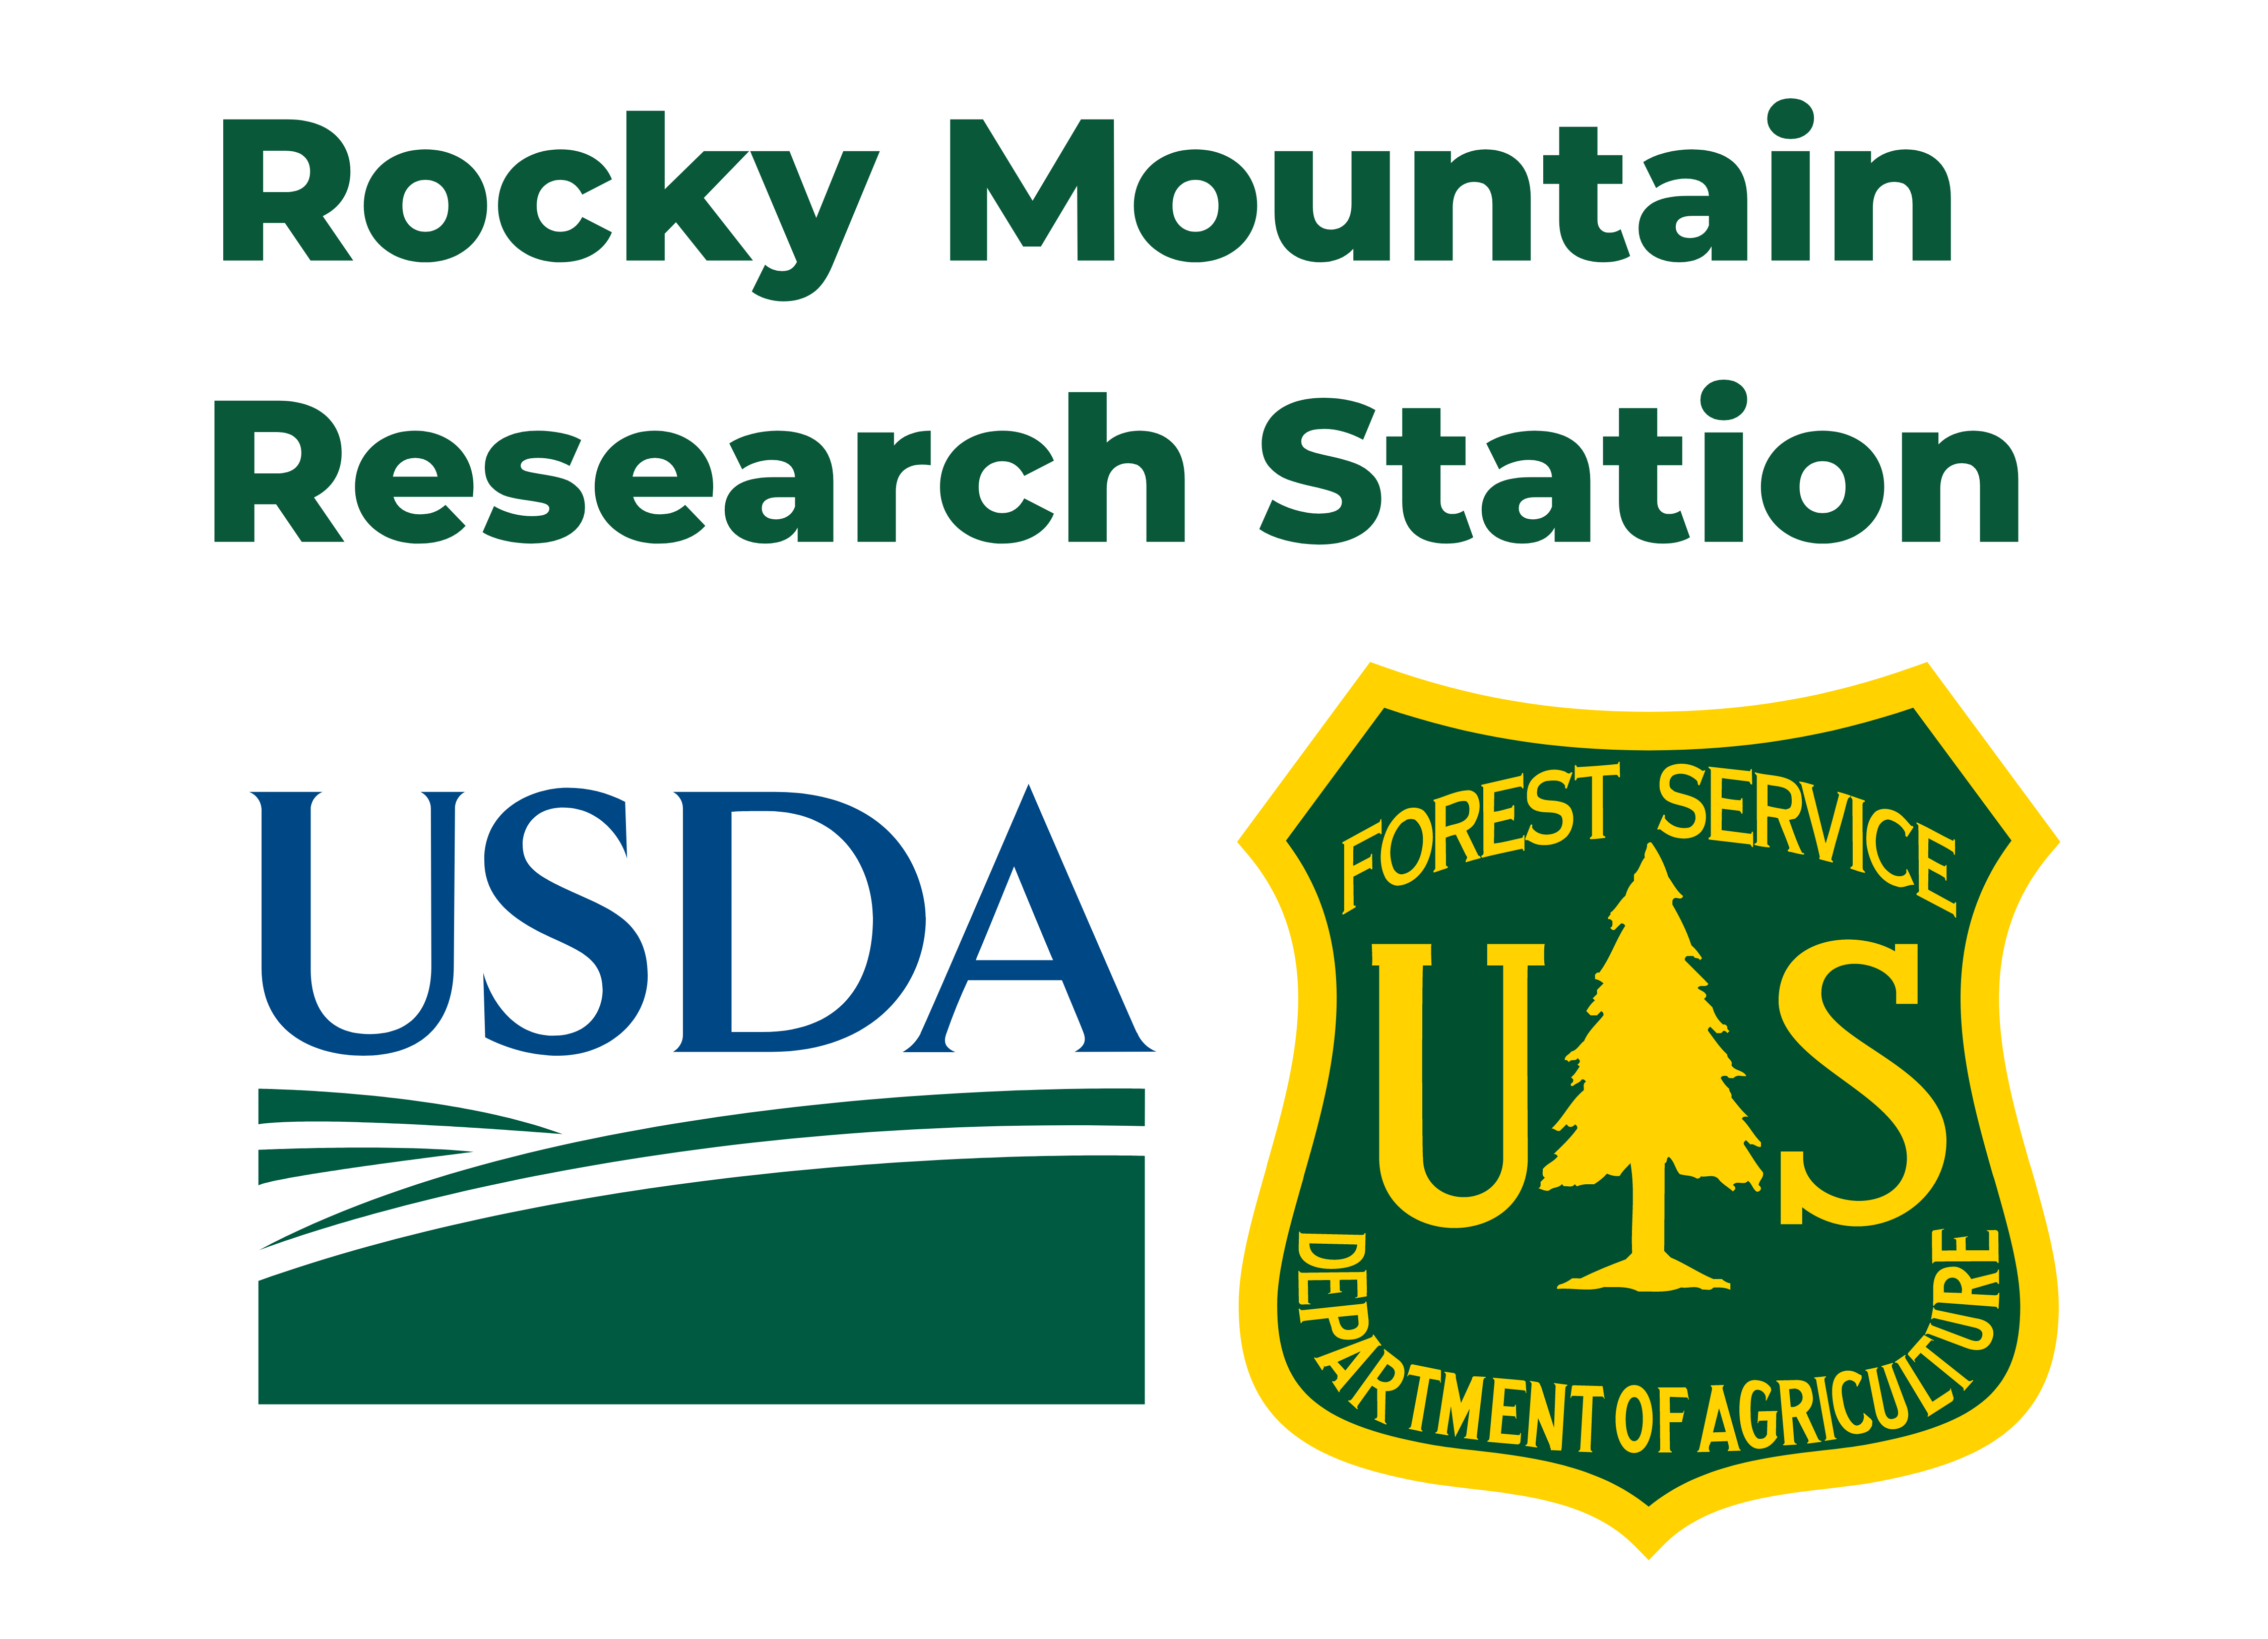 image of the Rocky Mountain Research Station USDA FS logo